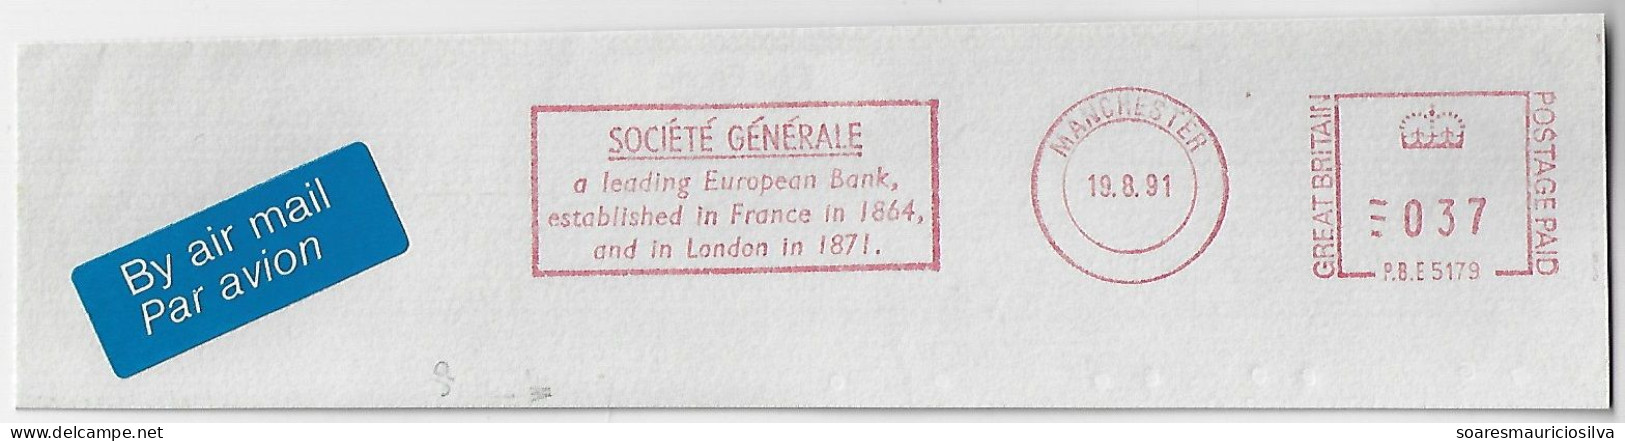 Great Britain 1991 Meter Stamp Pitney Bowes 5000 Series With Slogan By Société Générale Bank In Manchester - Covers & Documents